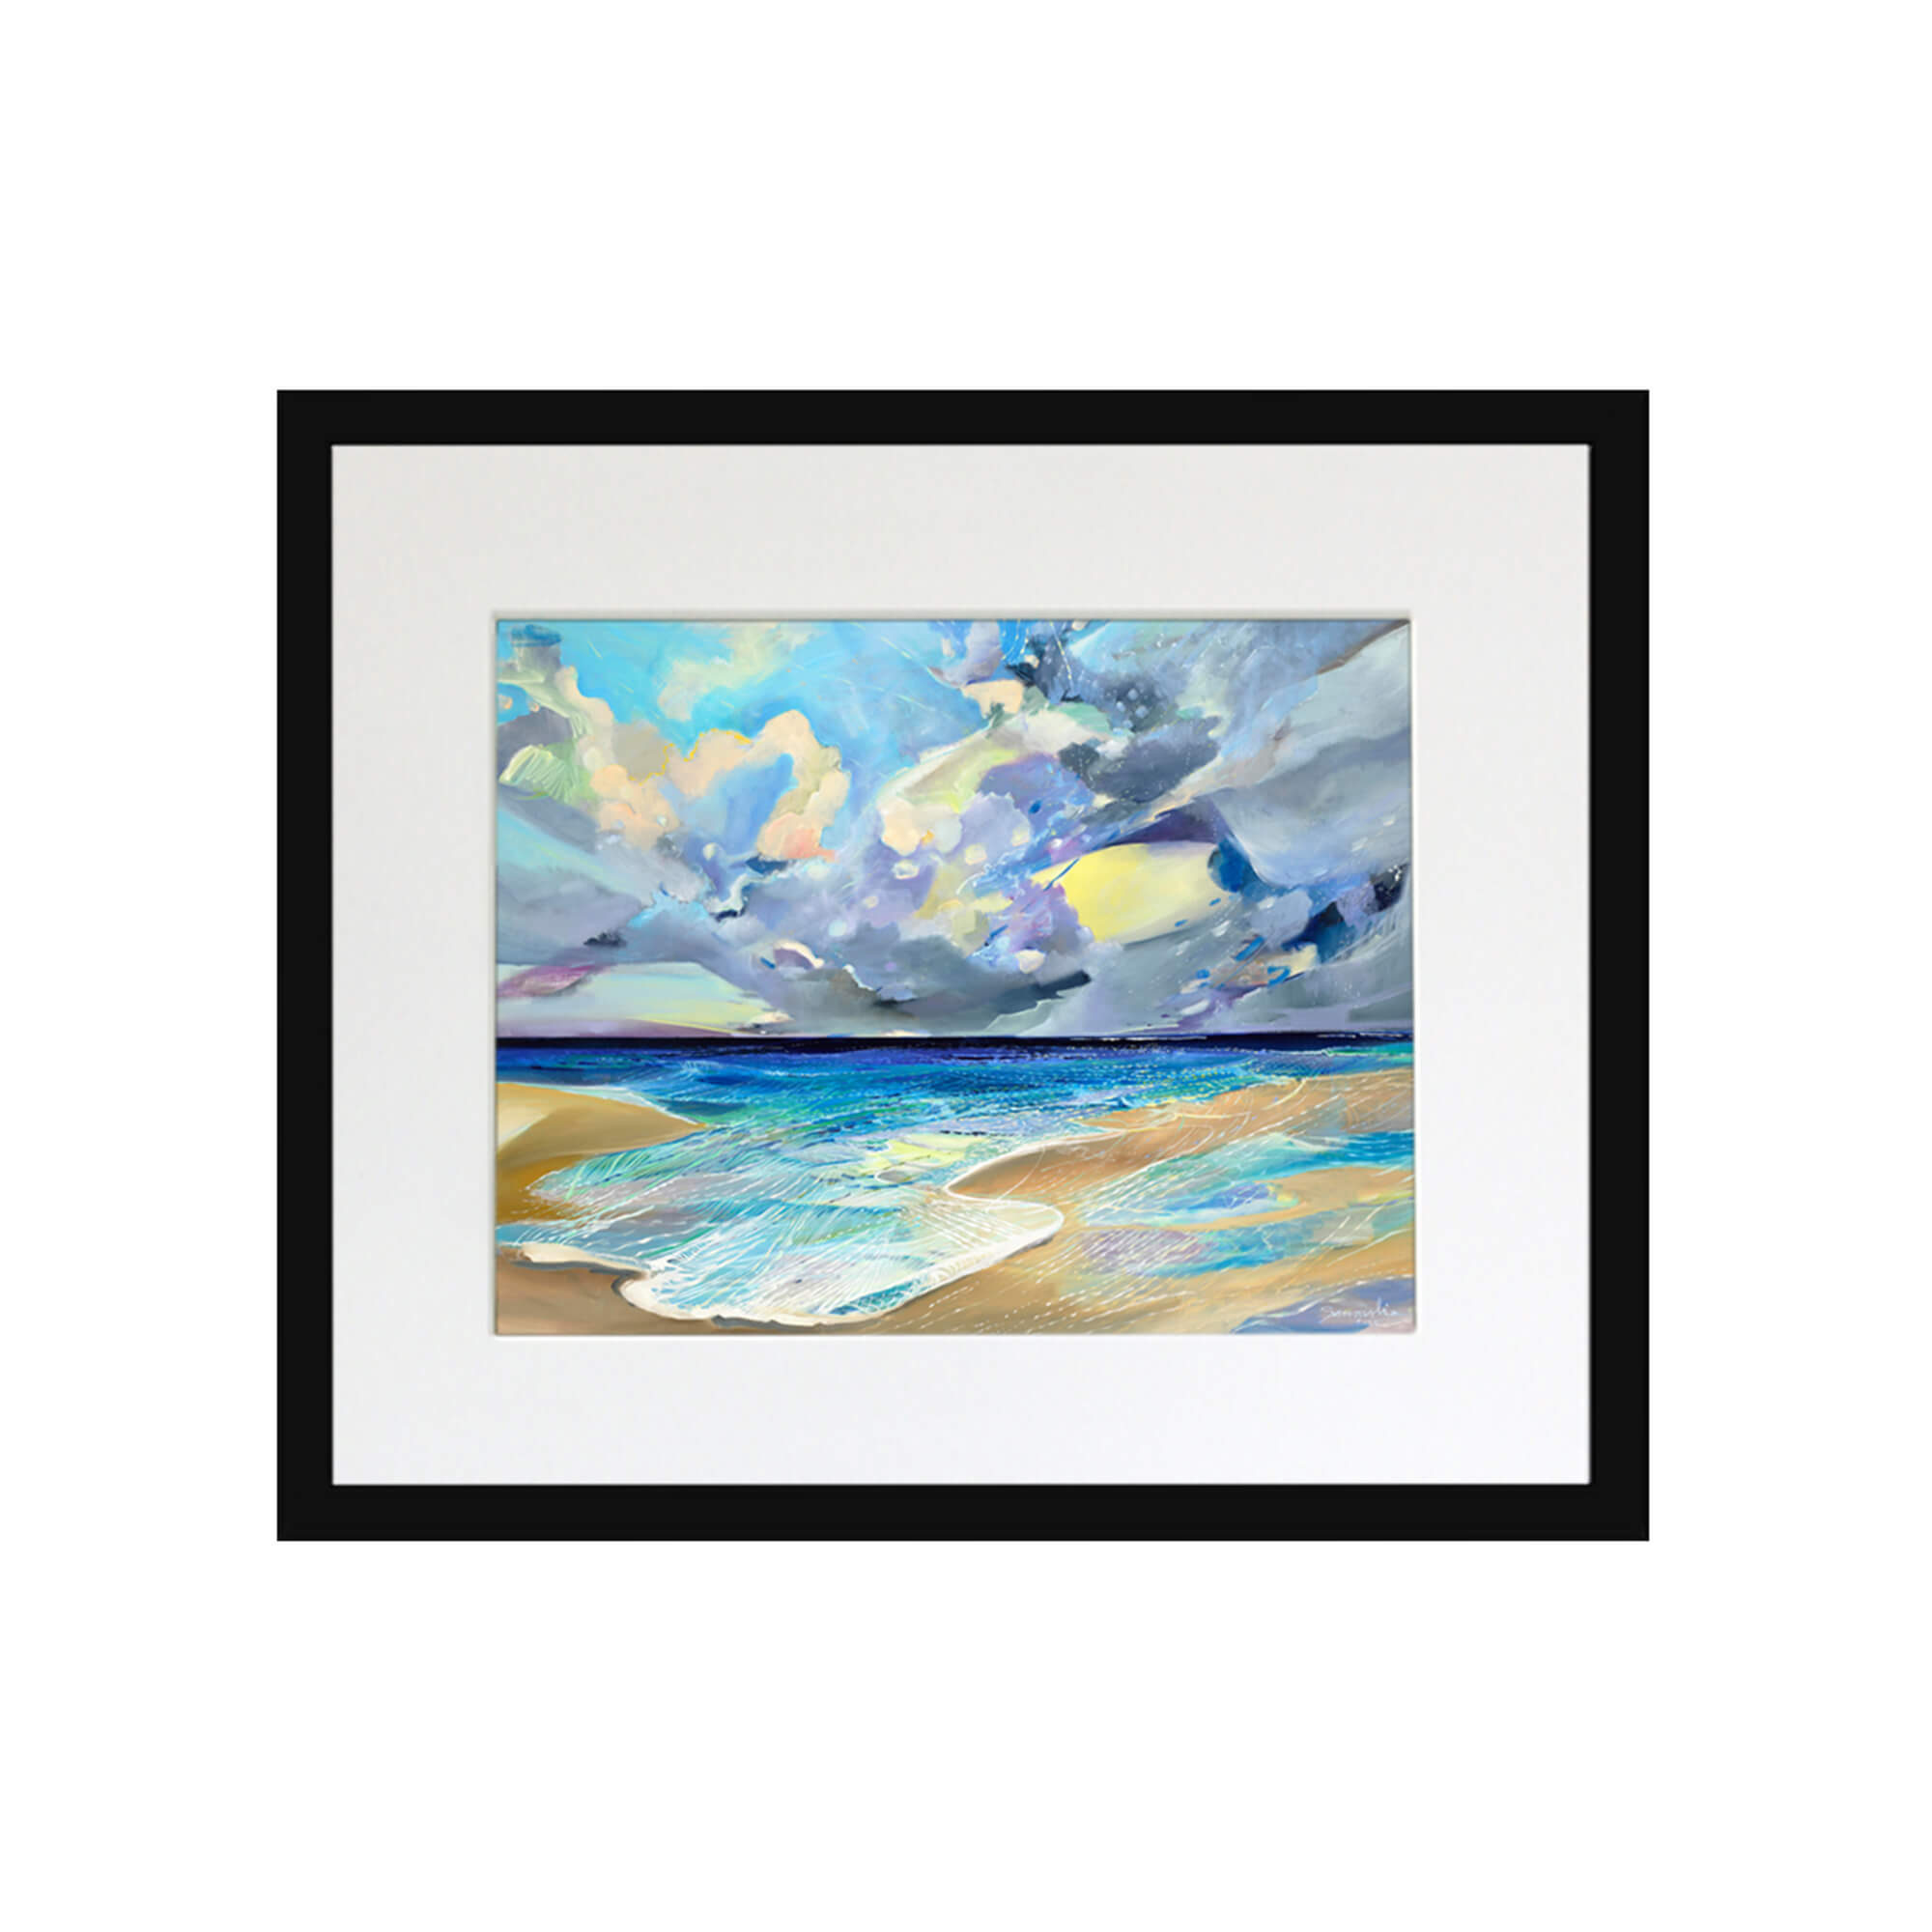 An abstract seascape by Hawaii artis